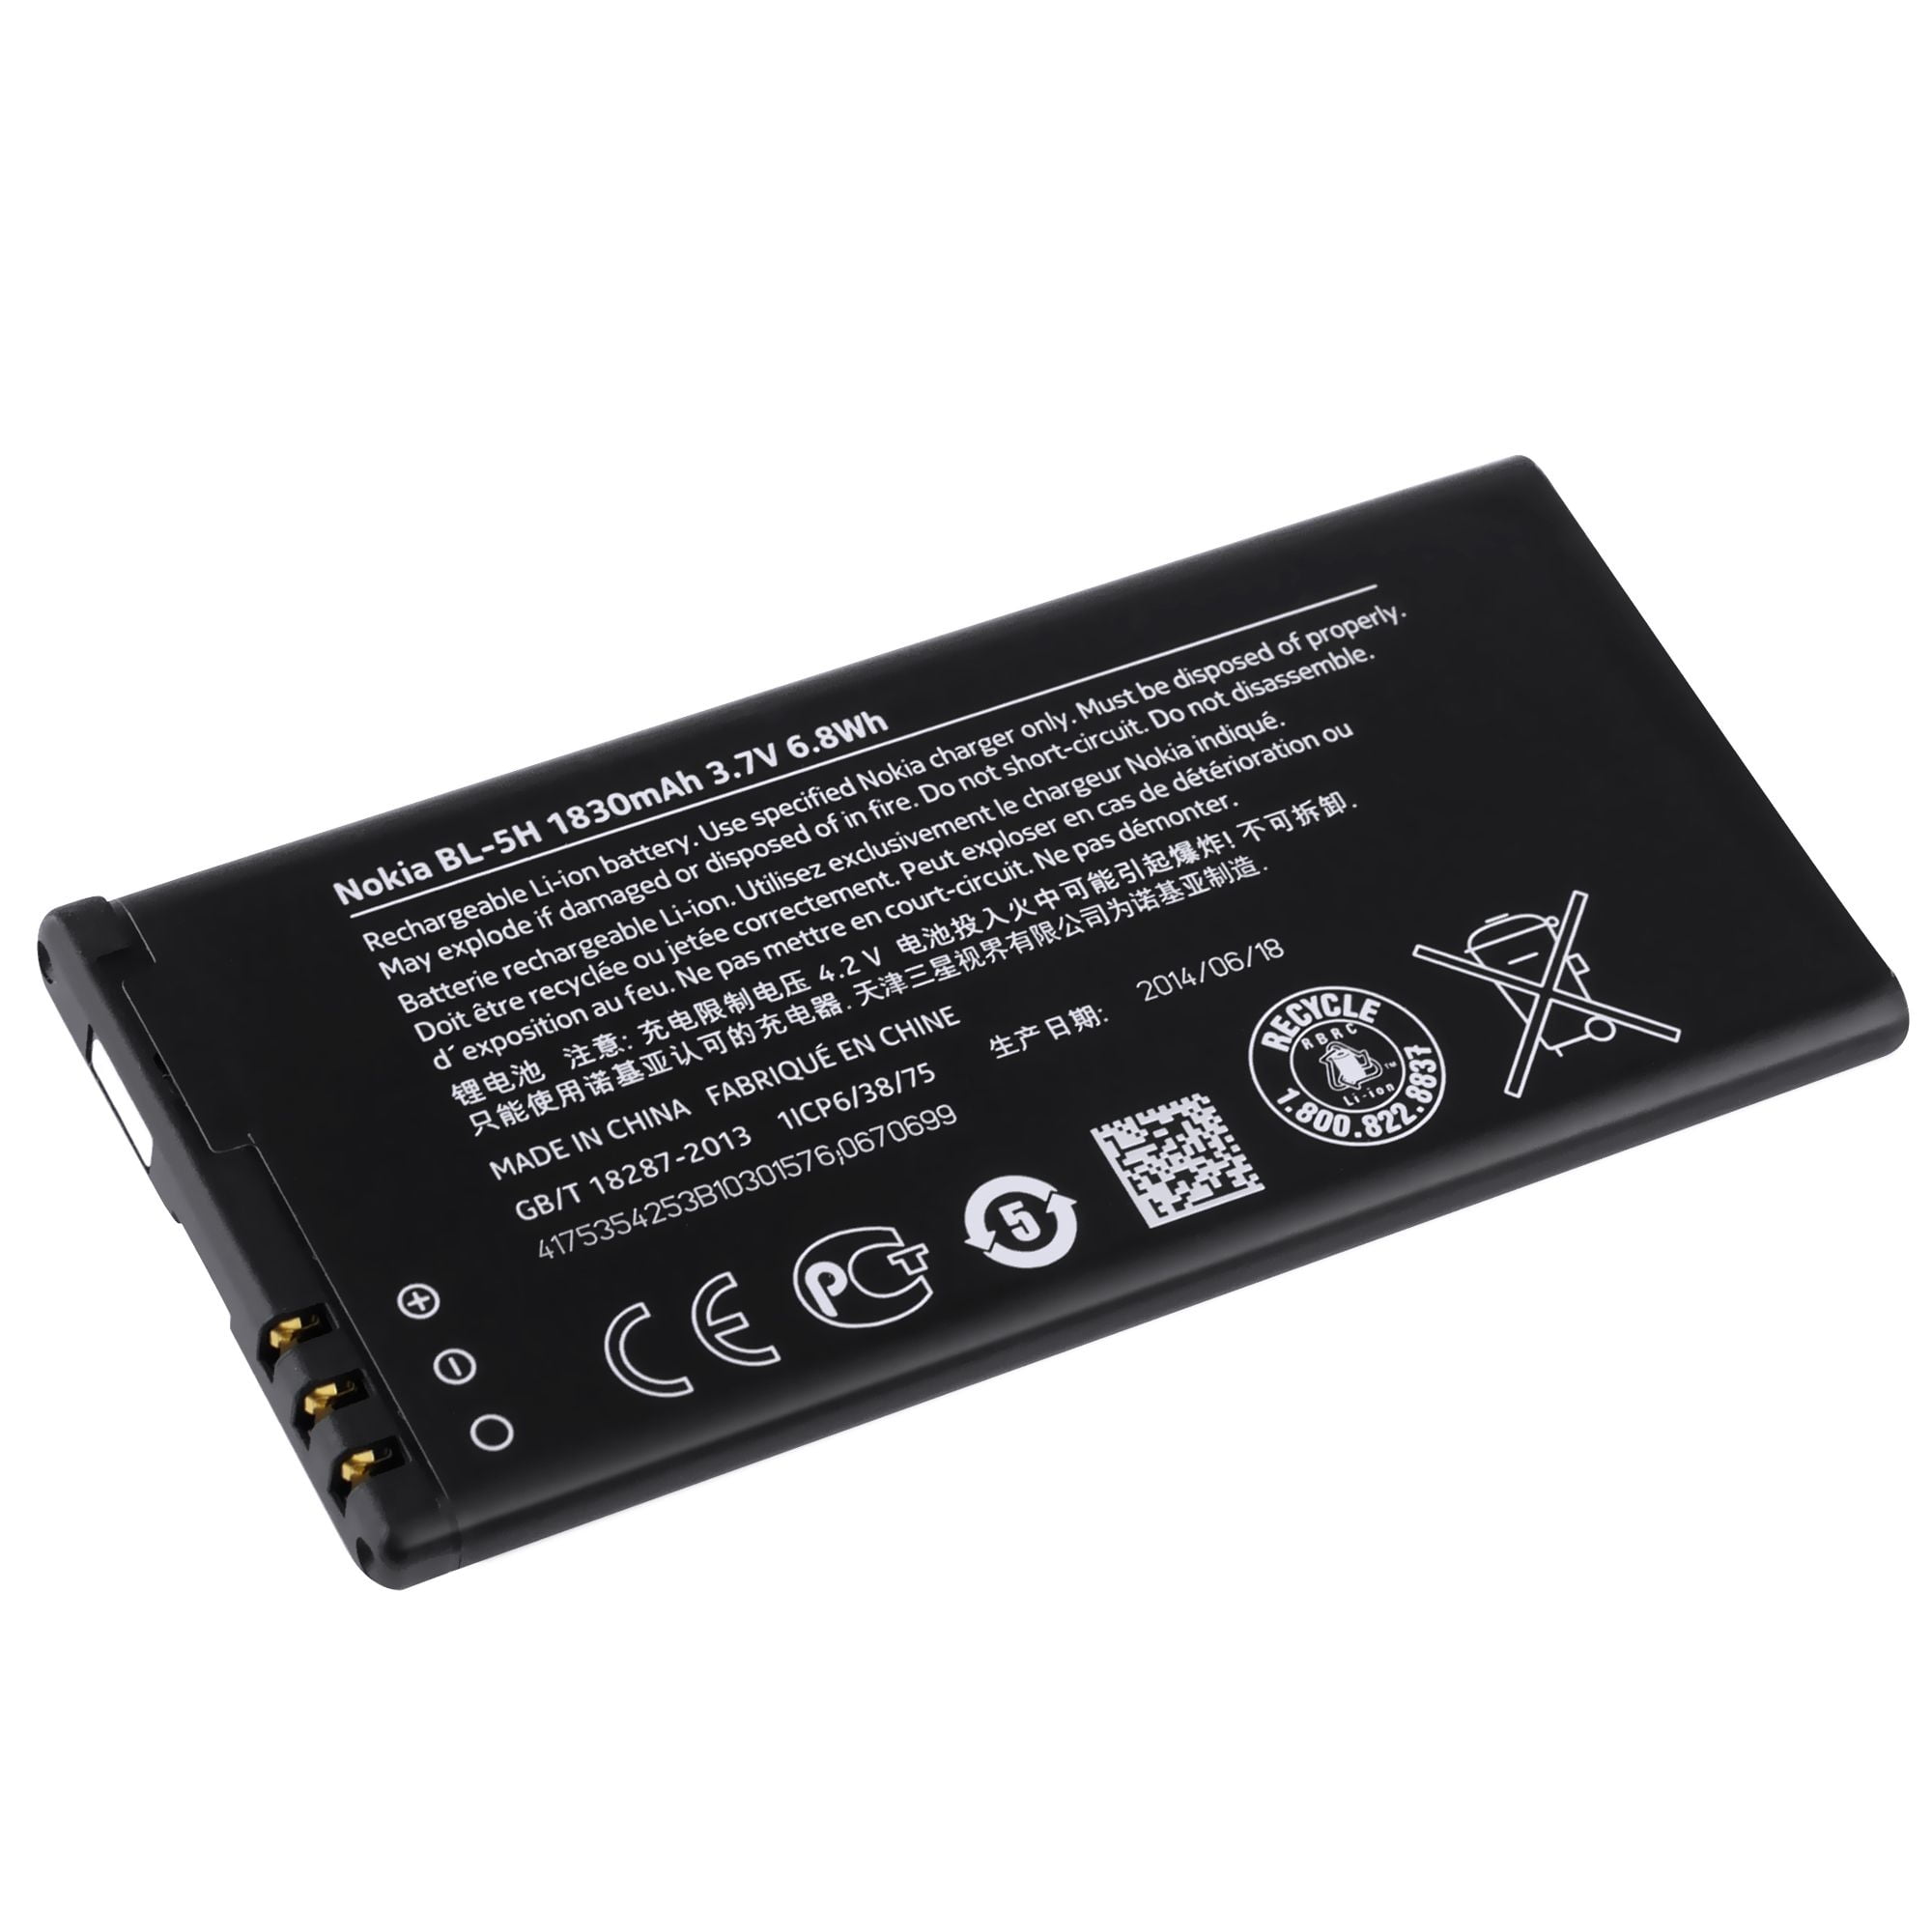 reaction Against The actual Nokia Lumia 635 Battery OEM Original Replacement Battery BL-5H  (Refurbished) for Nokia Lumia 630 638 636 - Walmart.com